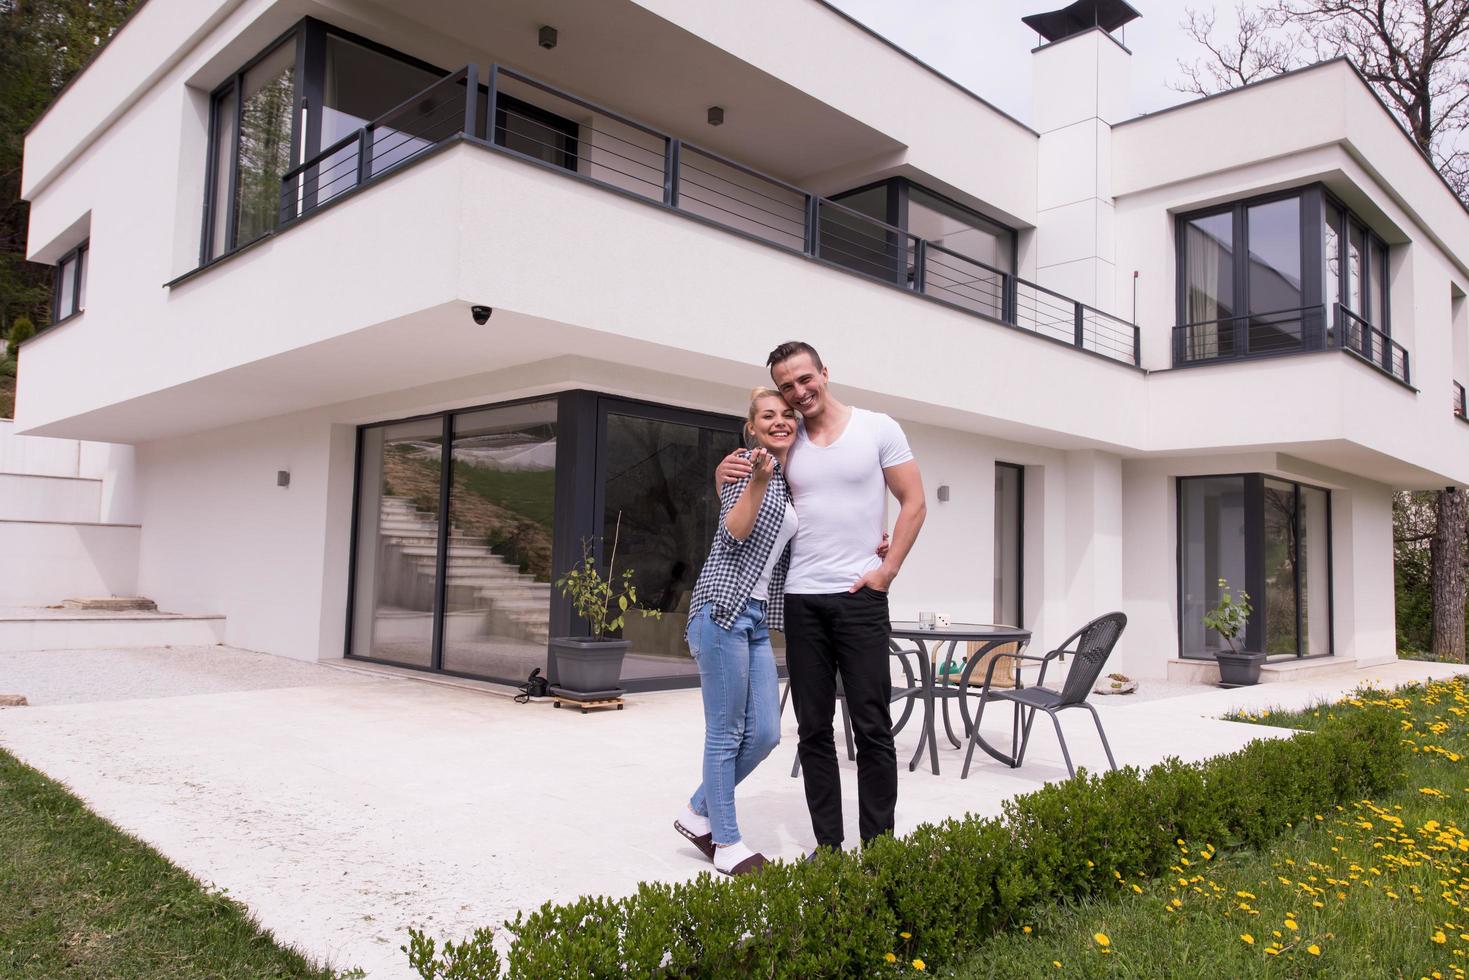 couple hugging in front of  new luxury home photo